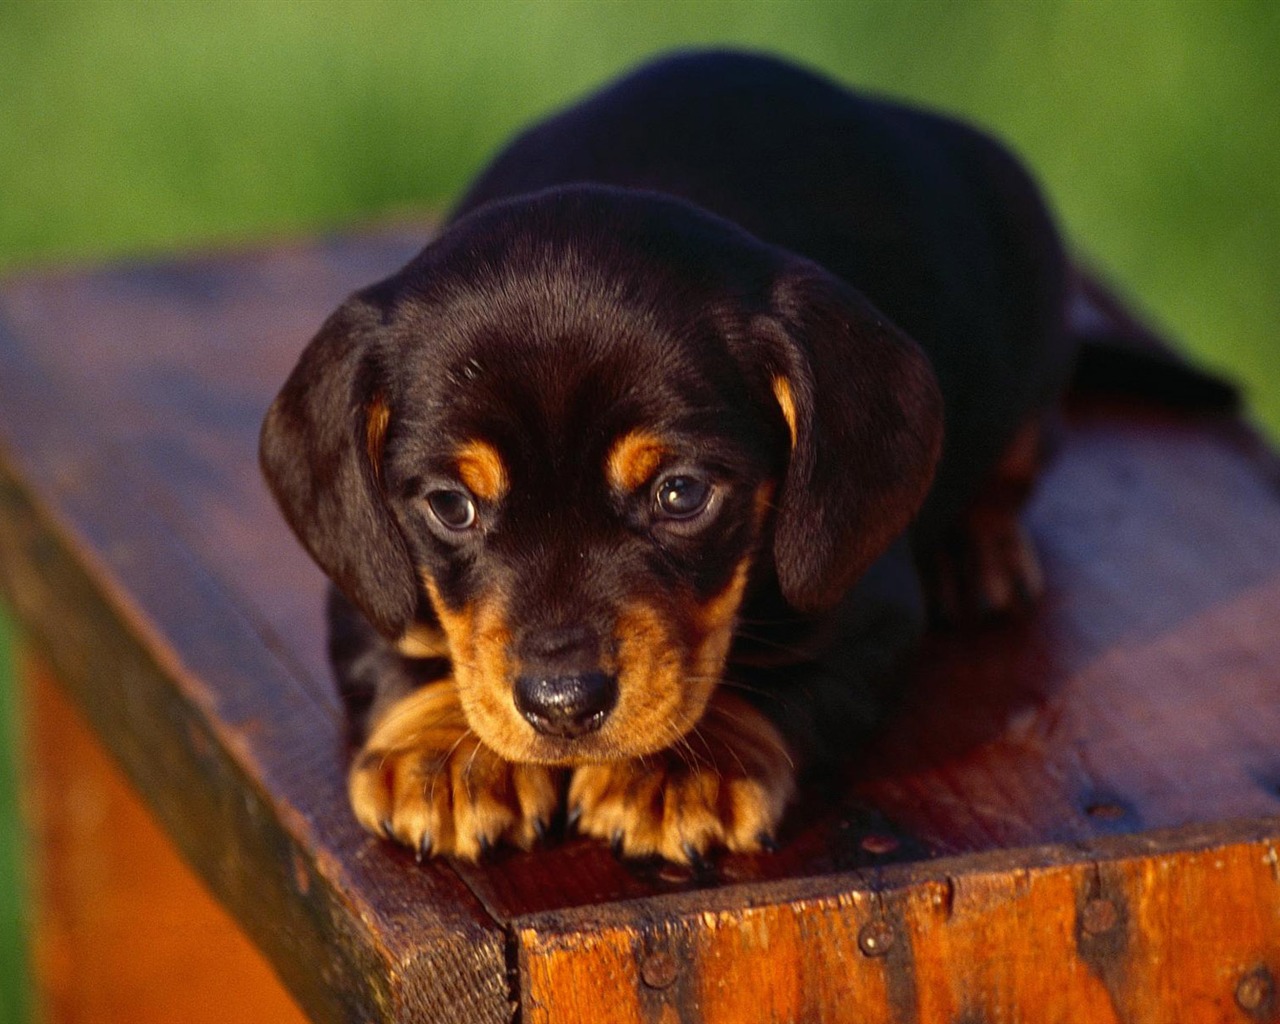 Puppy Photo HD wallpapers (3) #19 - 1280x1024